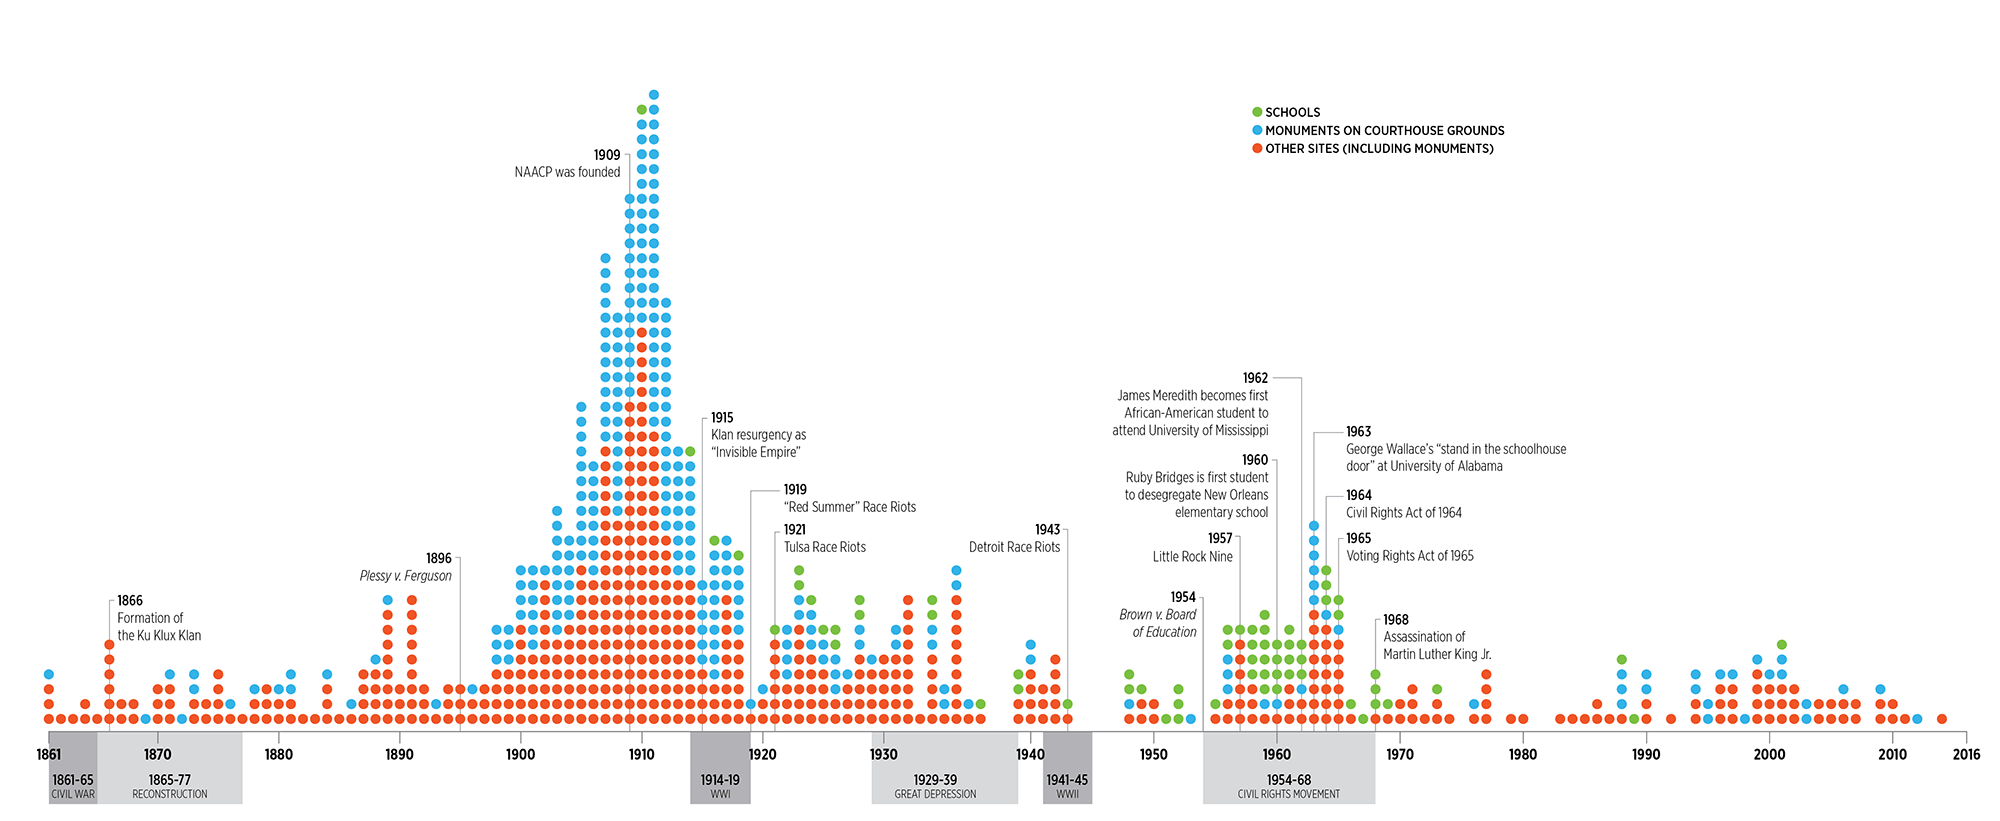 Installation of Confederate monuments by year (Image Credit: Southern Poverty Law Center)